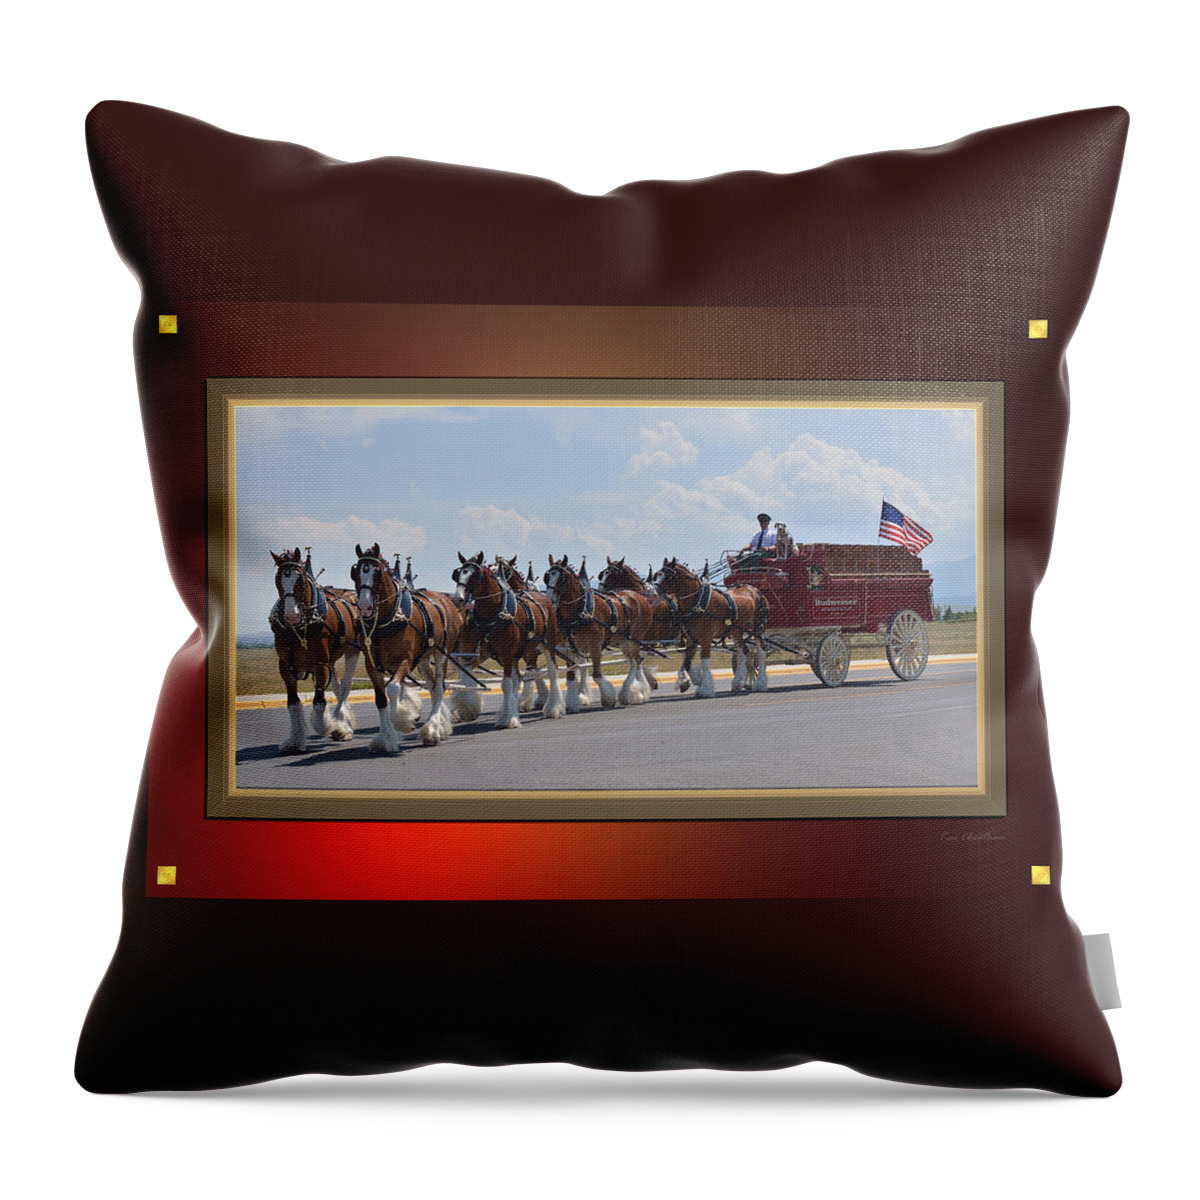 Animals Throw Pillow featuring the photograph World Renown Clydesdales by Kae Cheatham